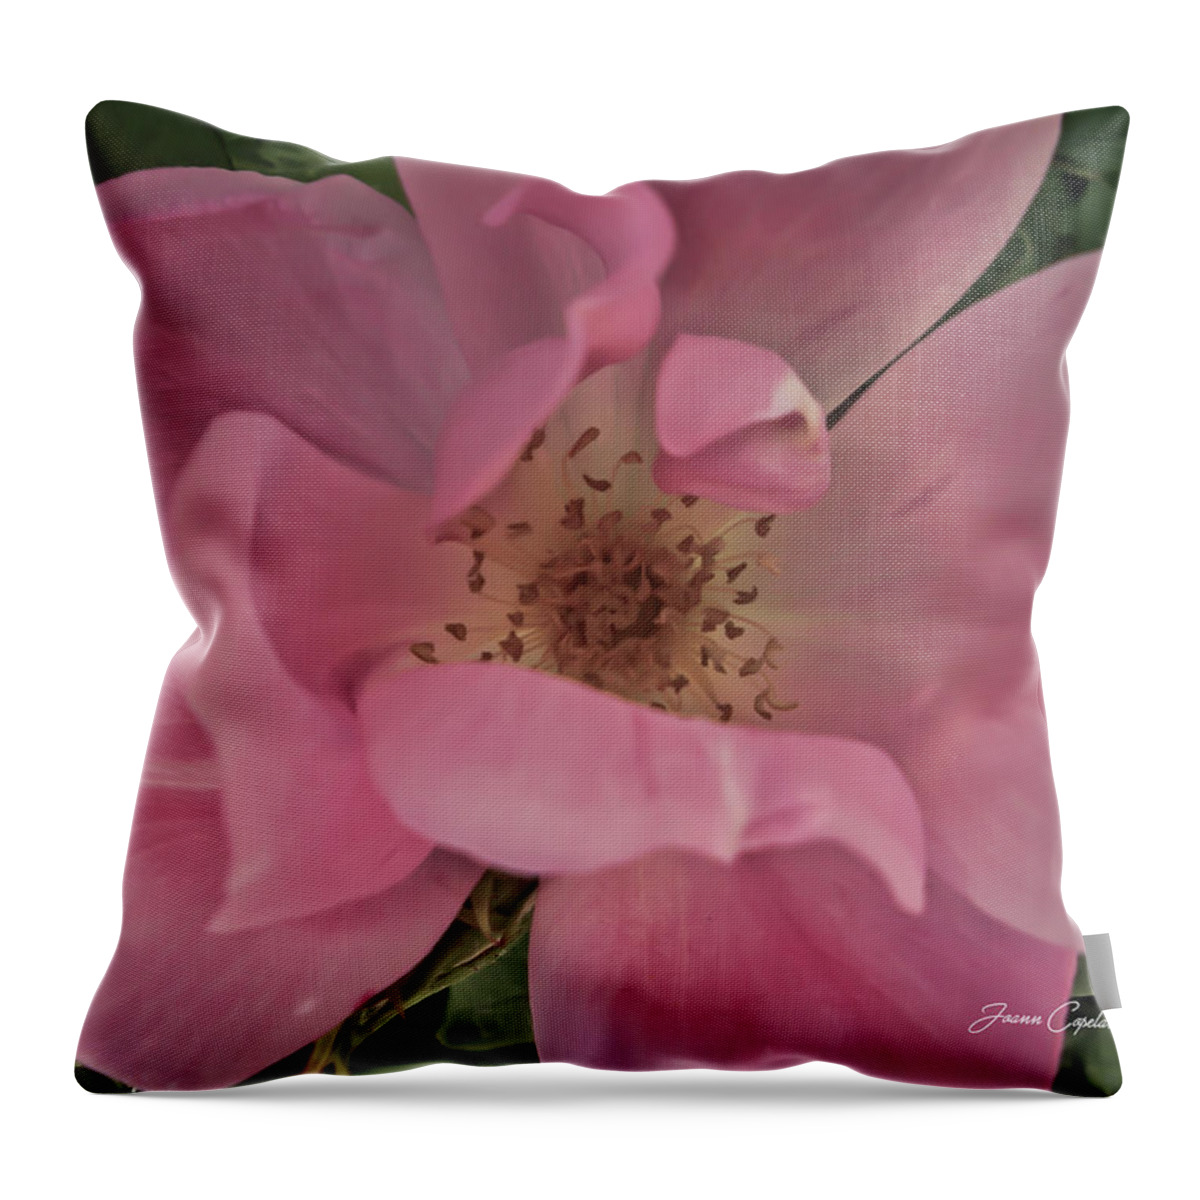 Pink Rose Photographs Throw Pillow featuring the photograph A Single Pink Rose by Joann Copeland-Paul